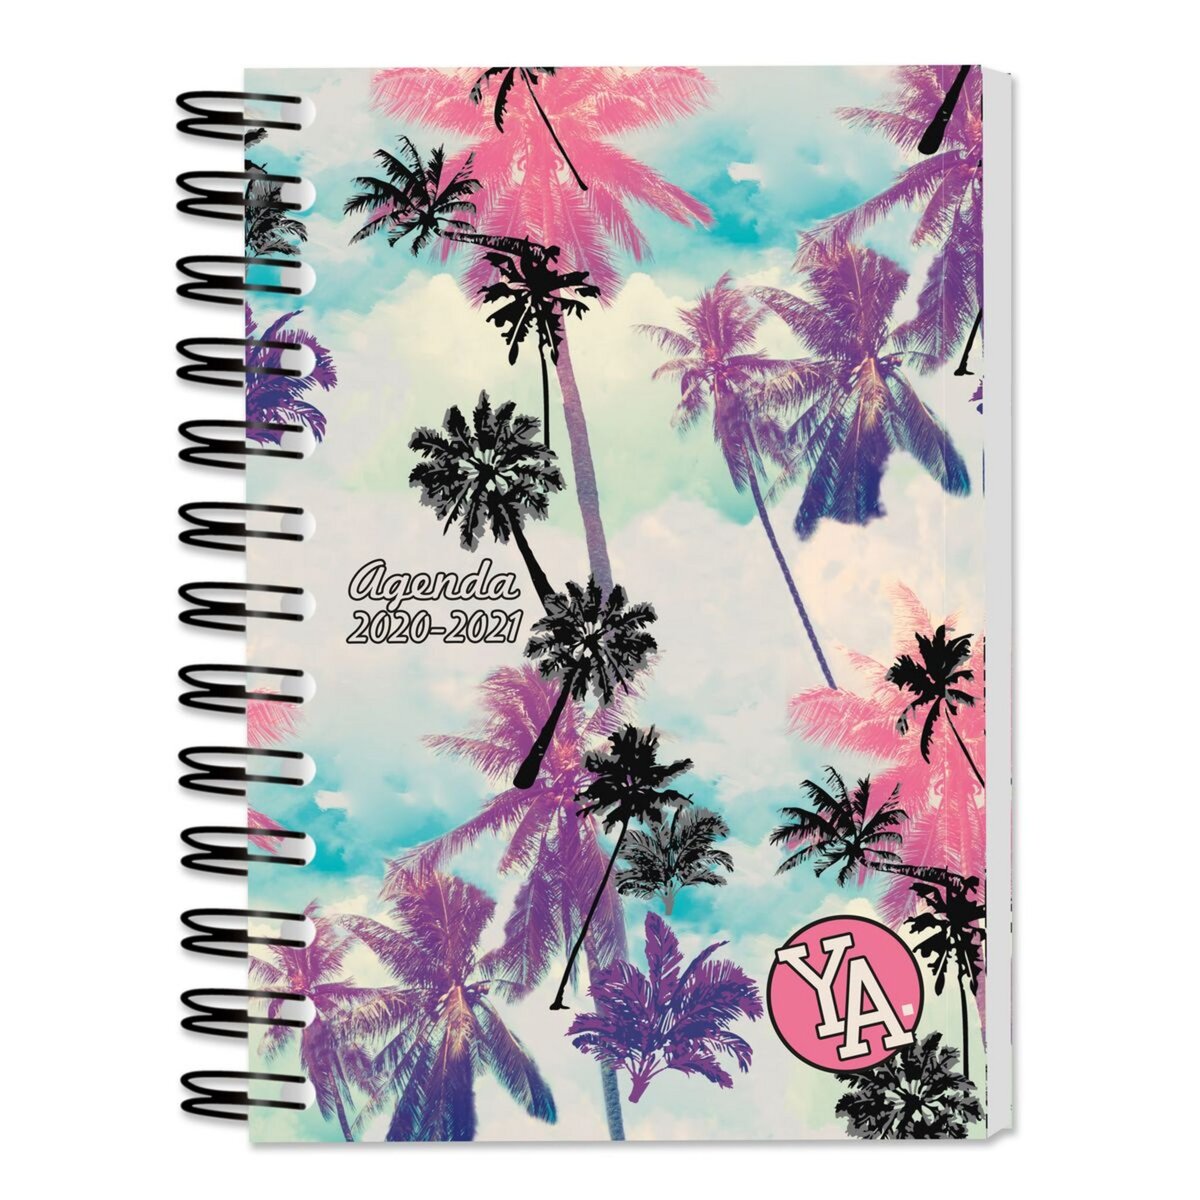 YOUNG'S ATTITUDE Agenda scolaire journalier couverture polypro Hawaï plage YOUNG ATTITUDE 2020-2021